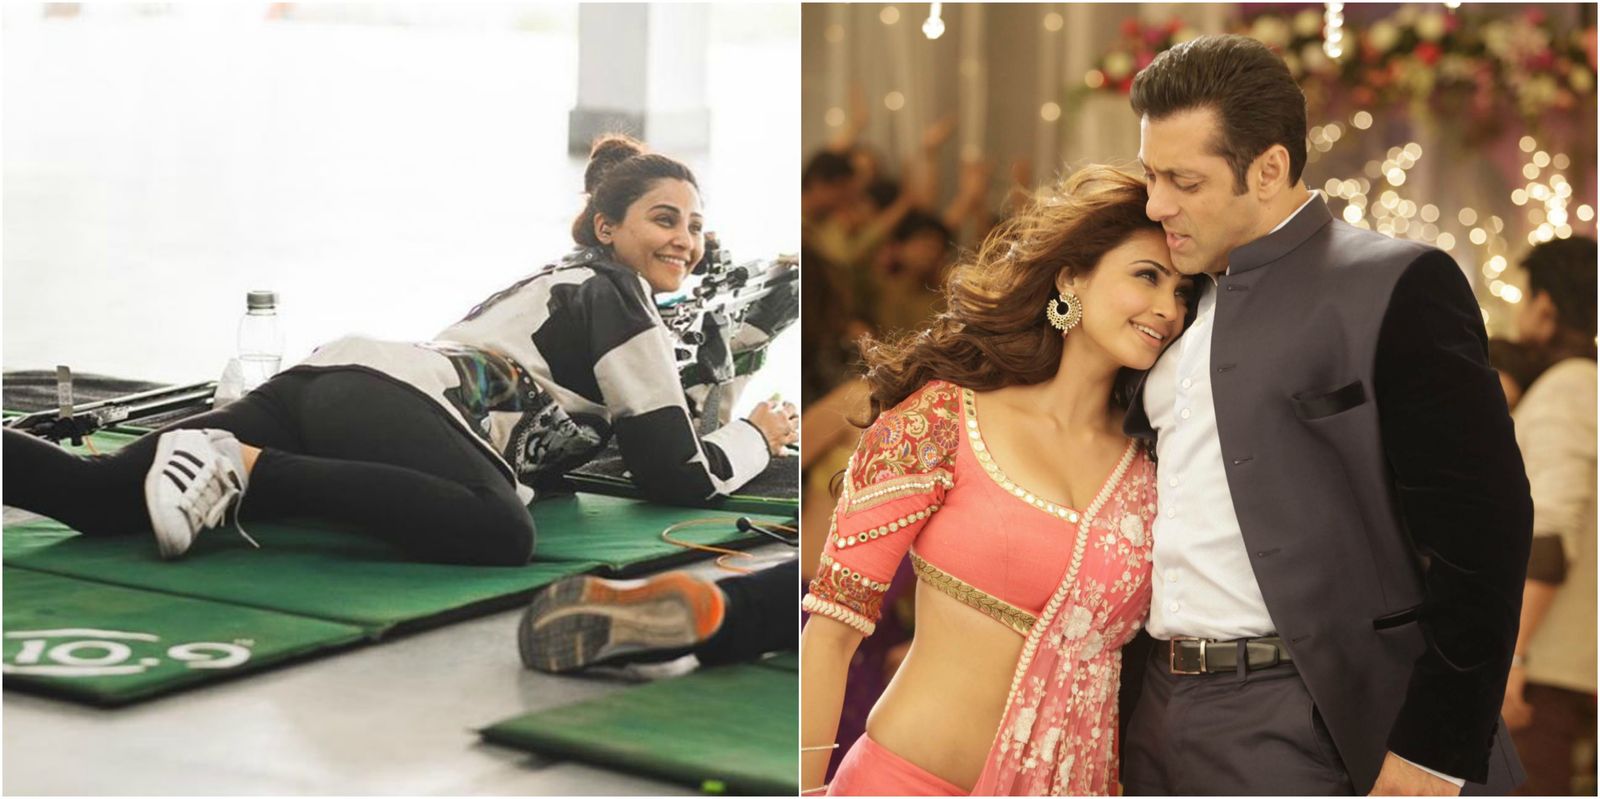 Salman Khan Congratulates Daisy Shah On Becoming A Licensed Shooter And We Are Trying Very Hard Not To Crack Up At The Irony